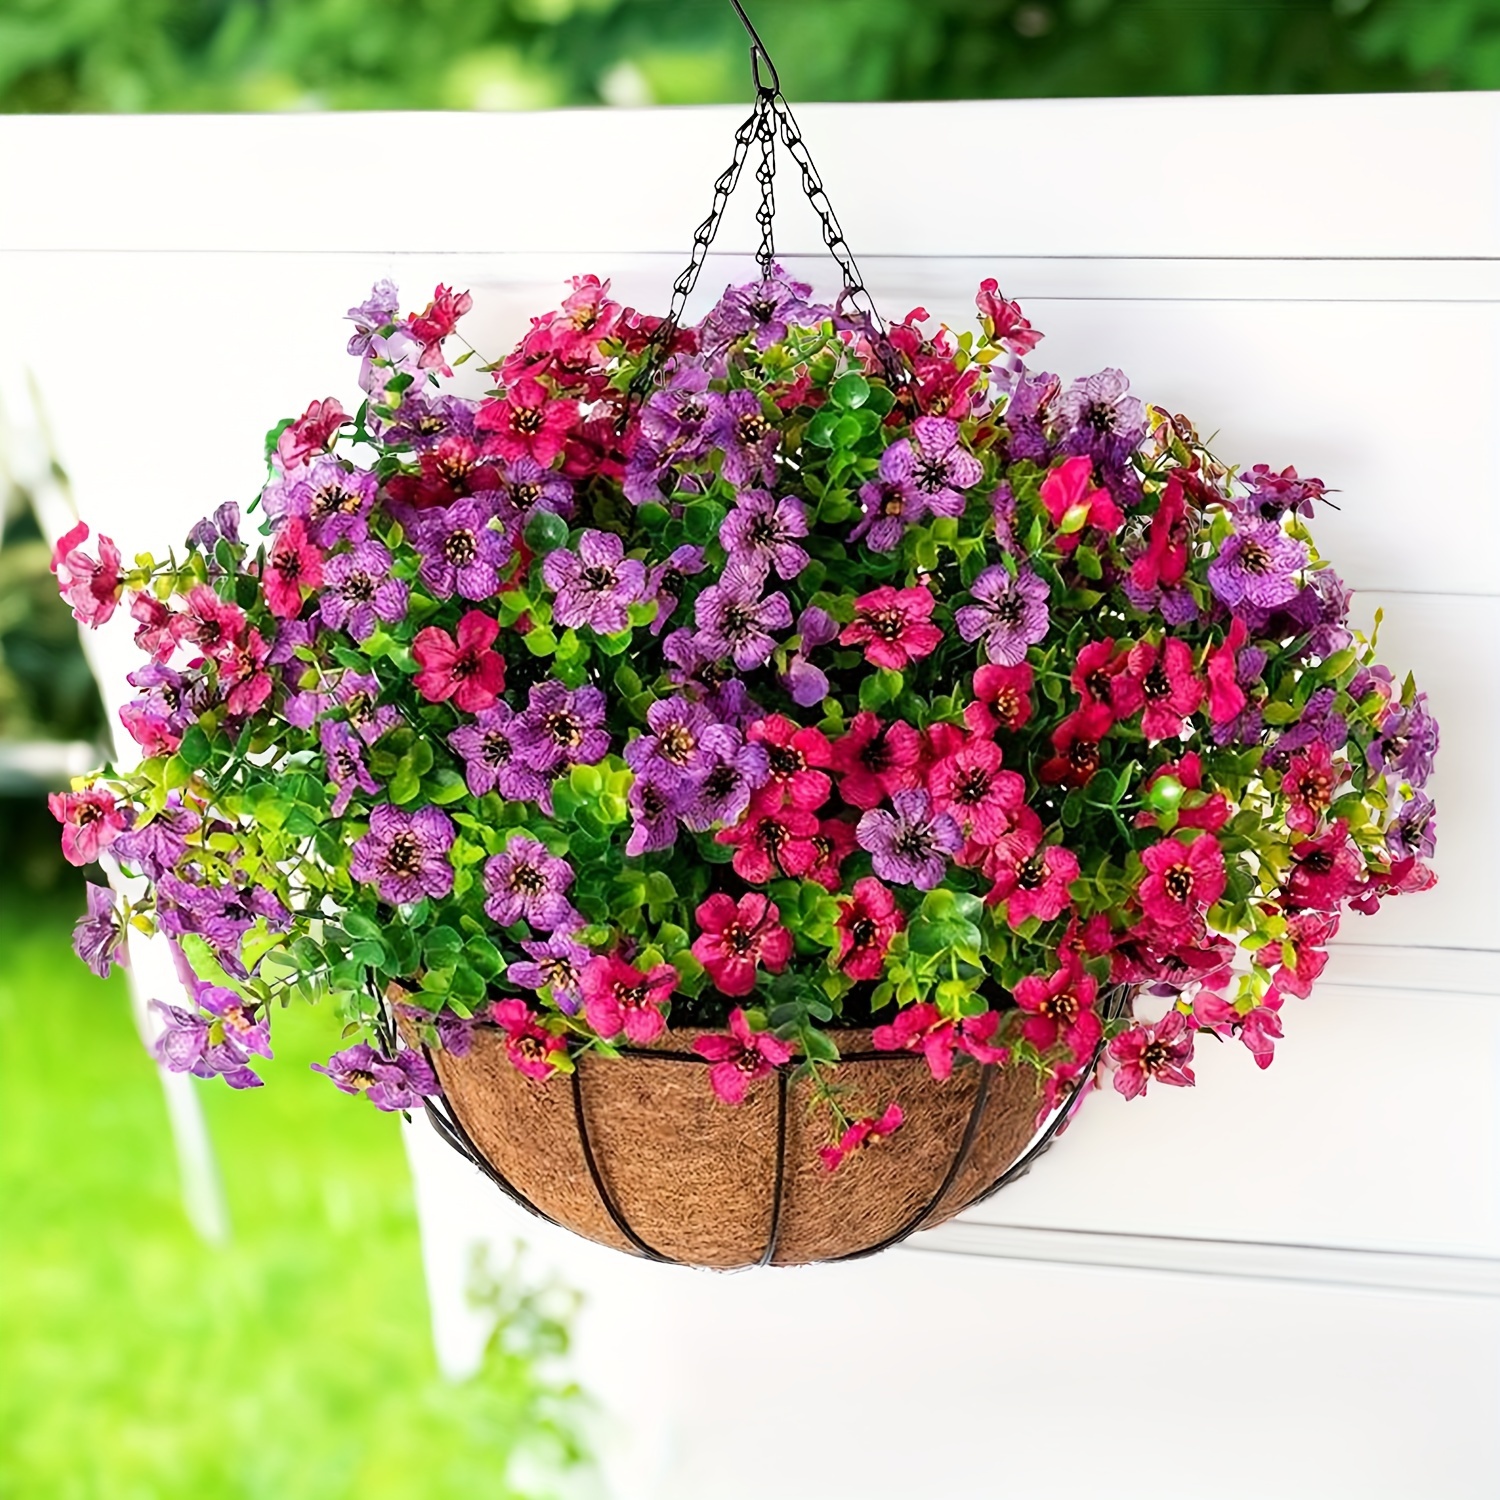 

1set, Artificial Hanging Plants Flowers With 8in Basket For Outdoor Spring Decor, Faux Silk Daisy Eucalyptus In Pot Planter Look Real, Uv Resistant Porch Home Indoor Patio Balcony Yard Decoration